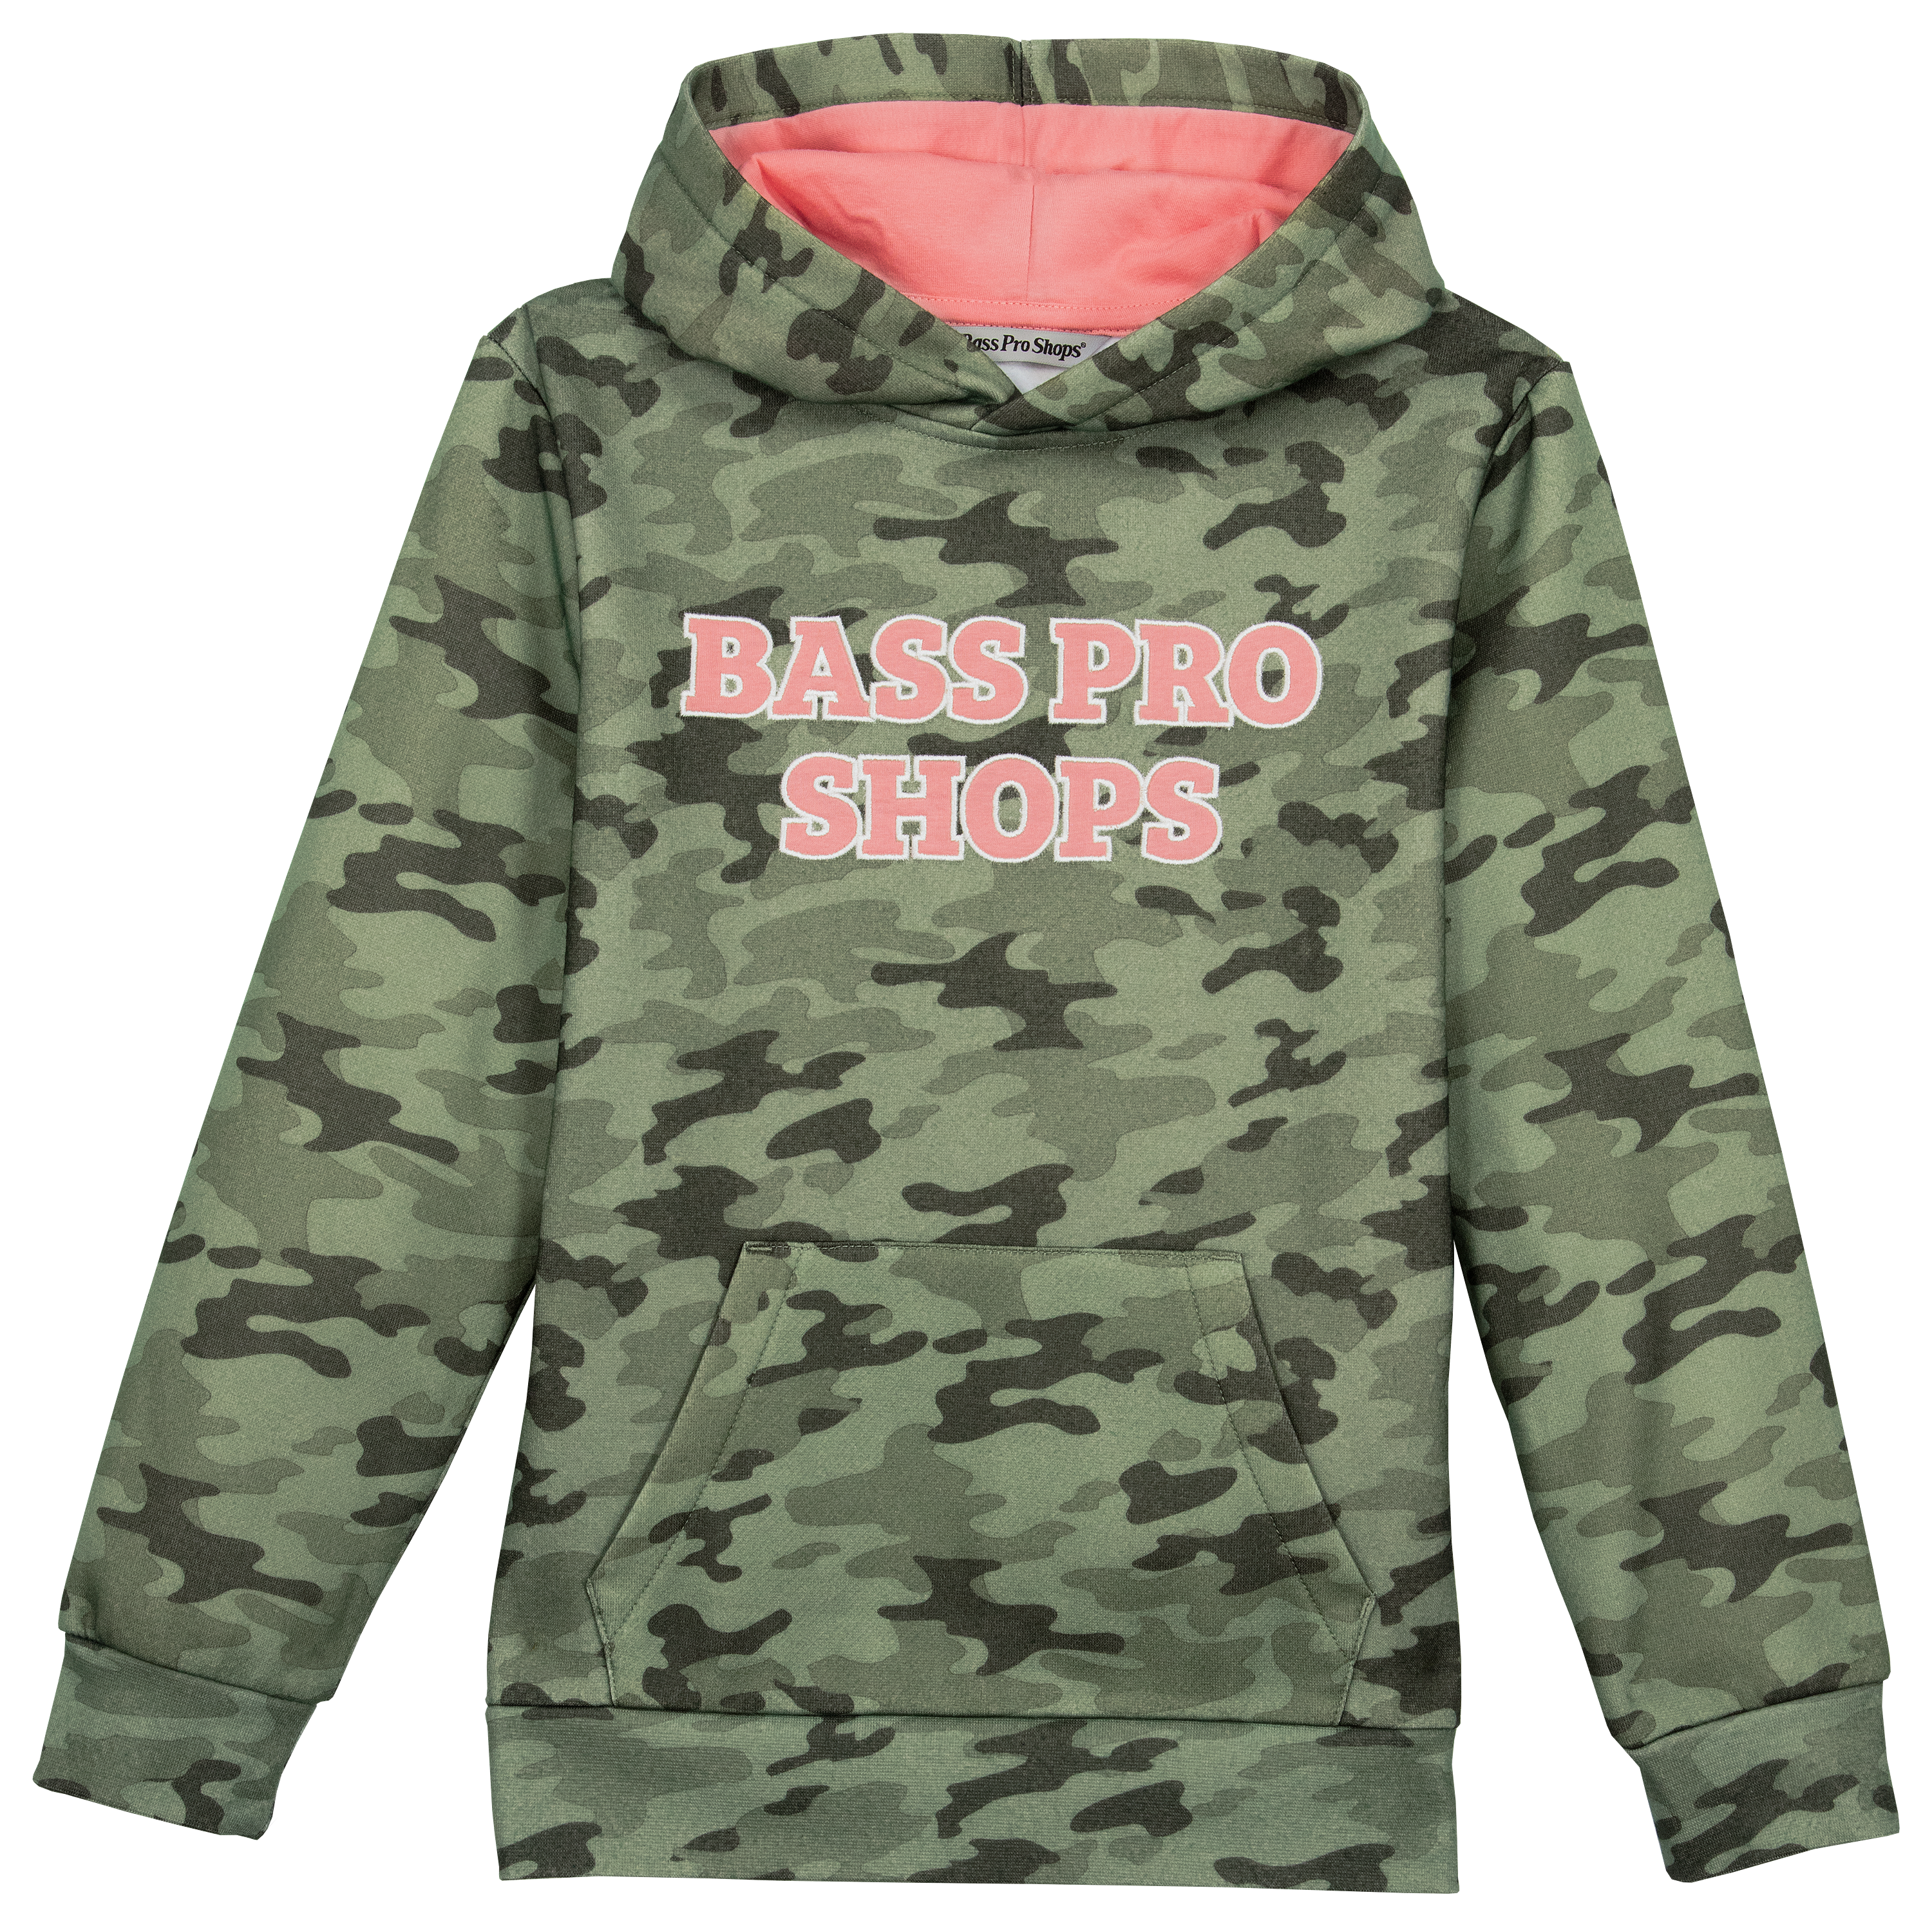 Bass Pro Shops Game Day Long-Sleeve Hoodie for Girls